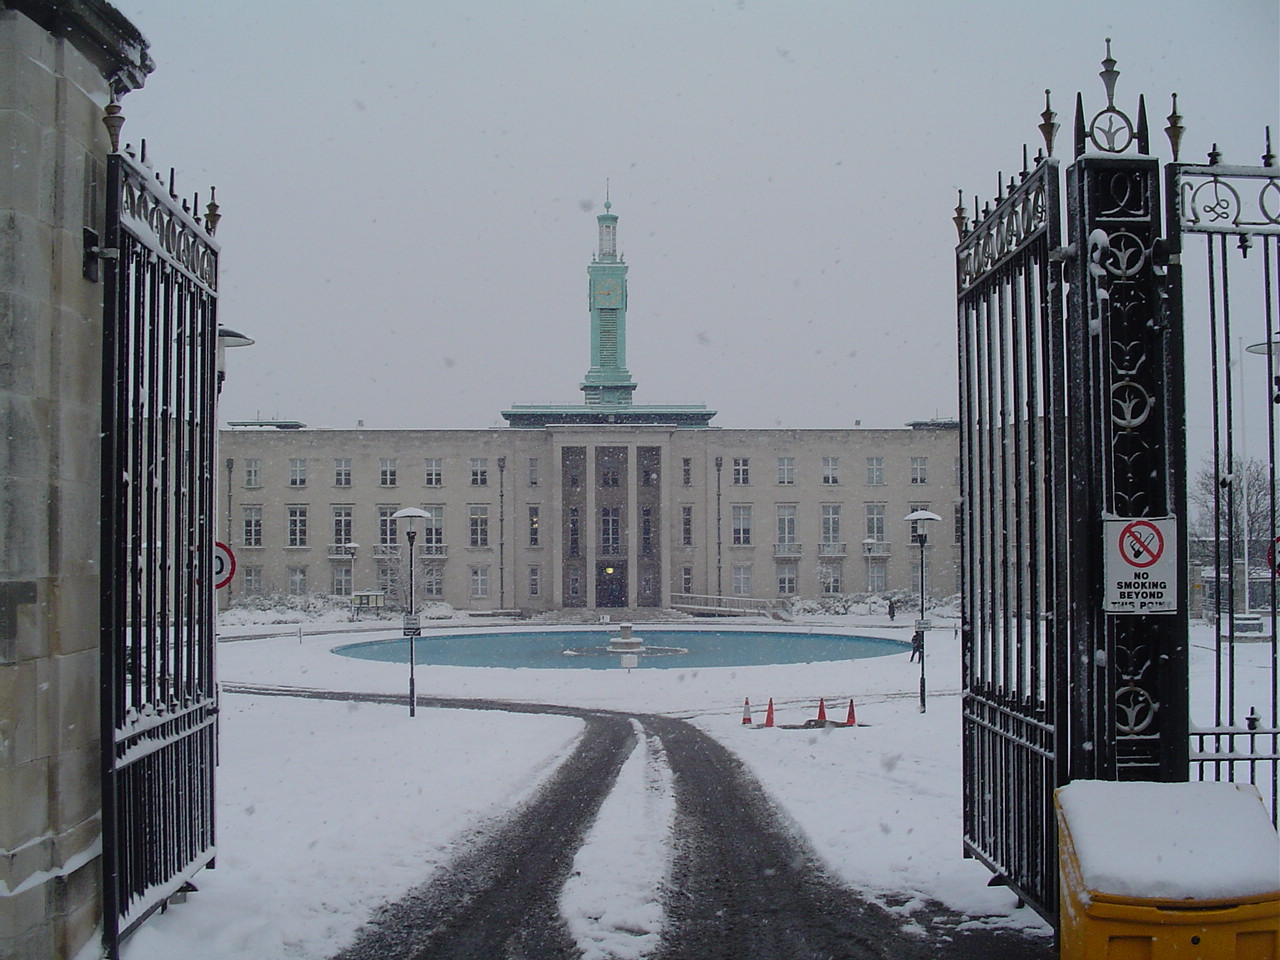 Waltham Forest Town Hall still open for business!